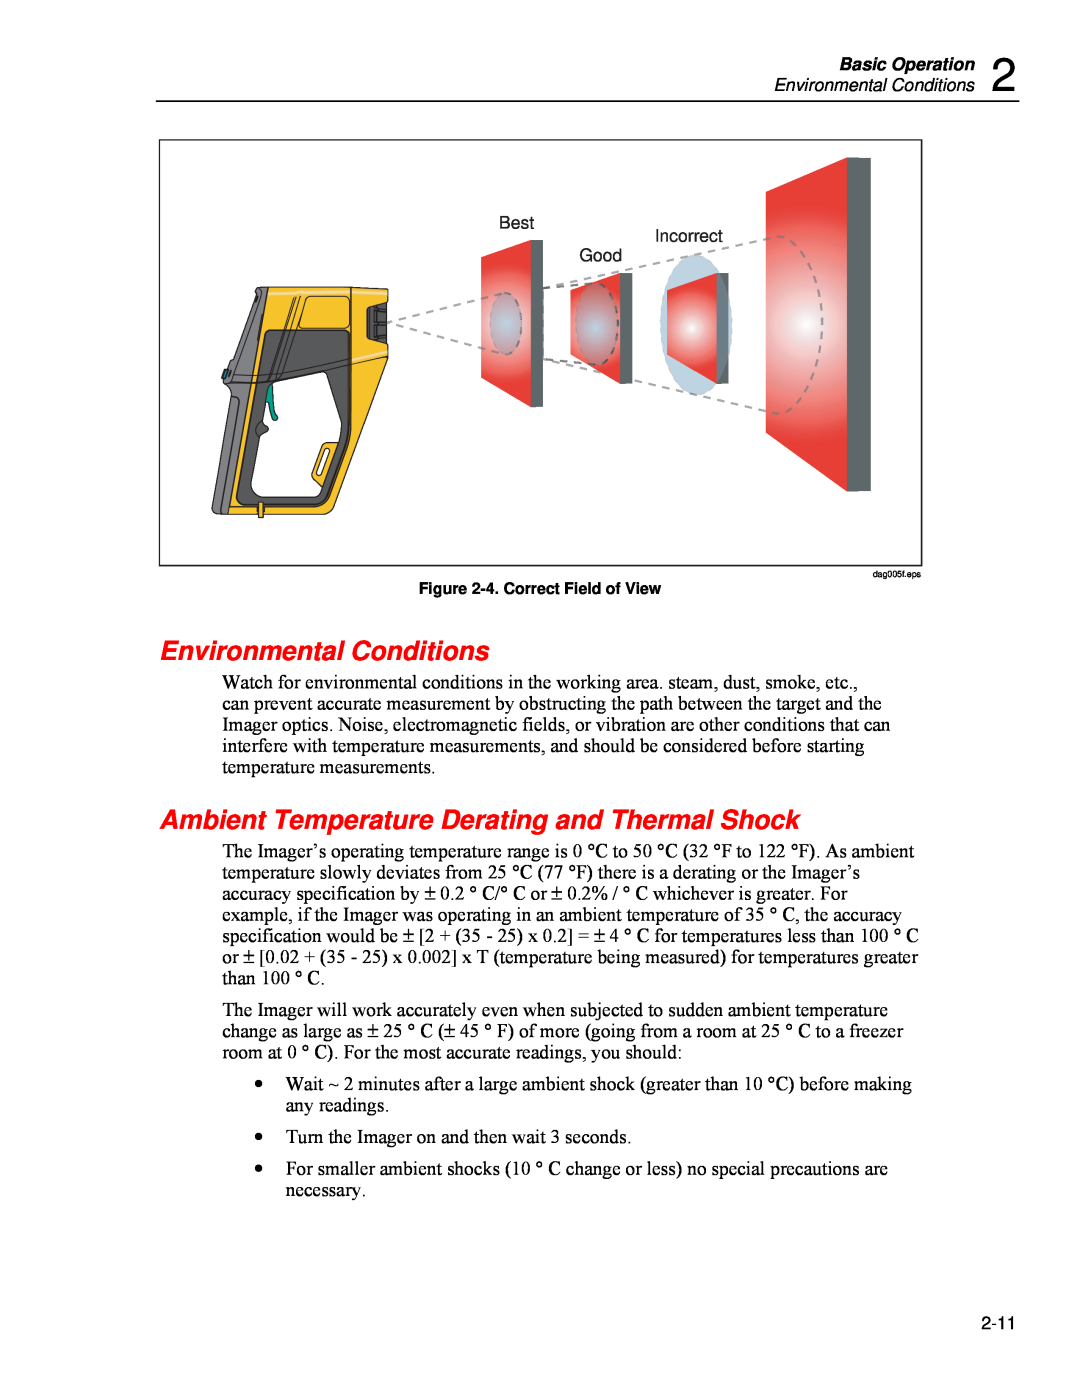 Fluke Ti20 user manual Environmental Conditions, Ambient Temperature Derating and Thermal Shock 